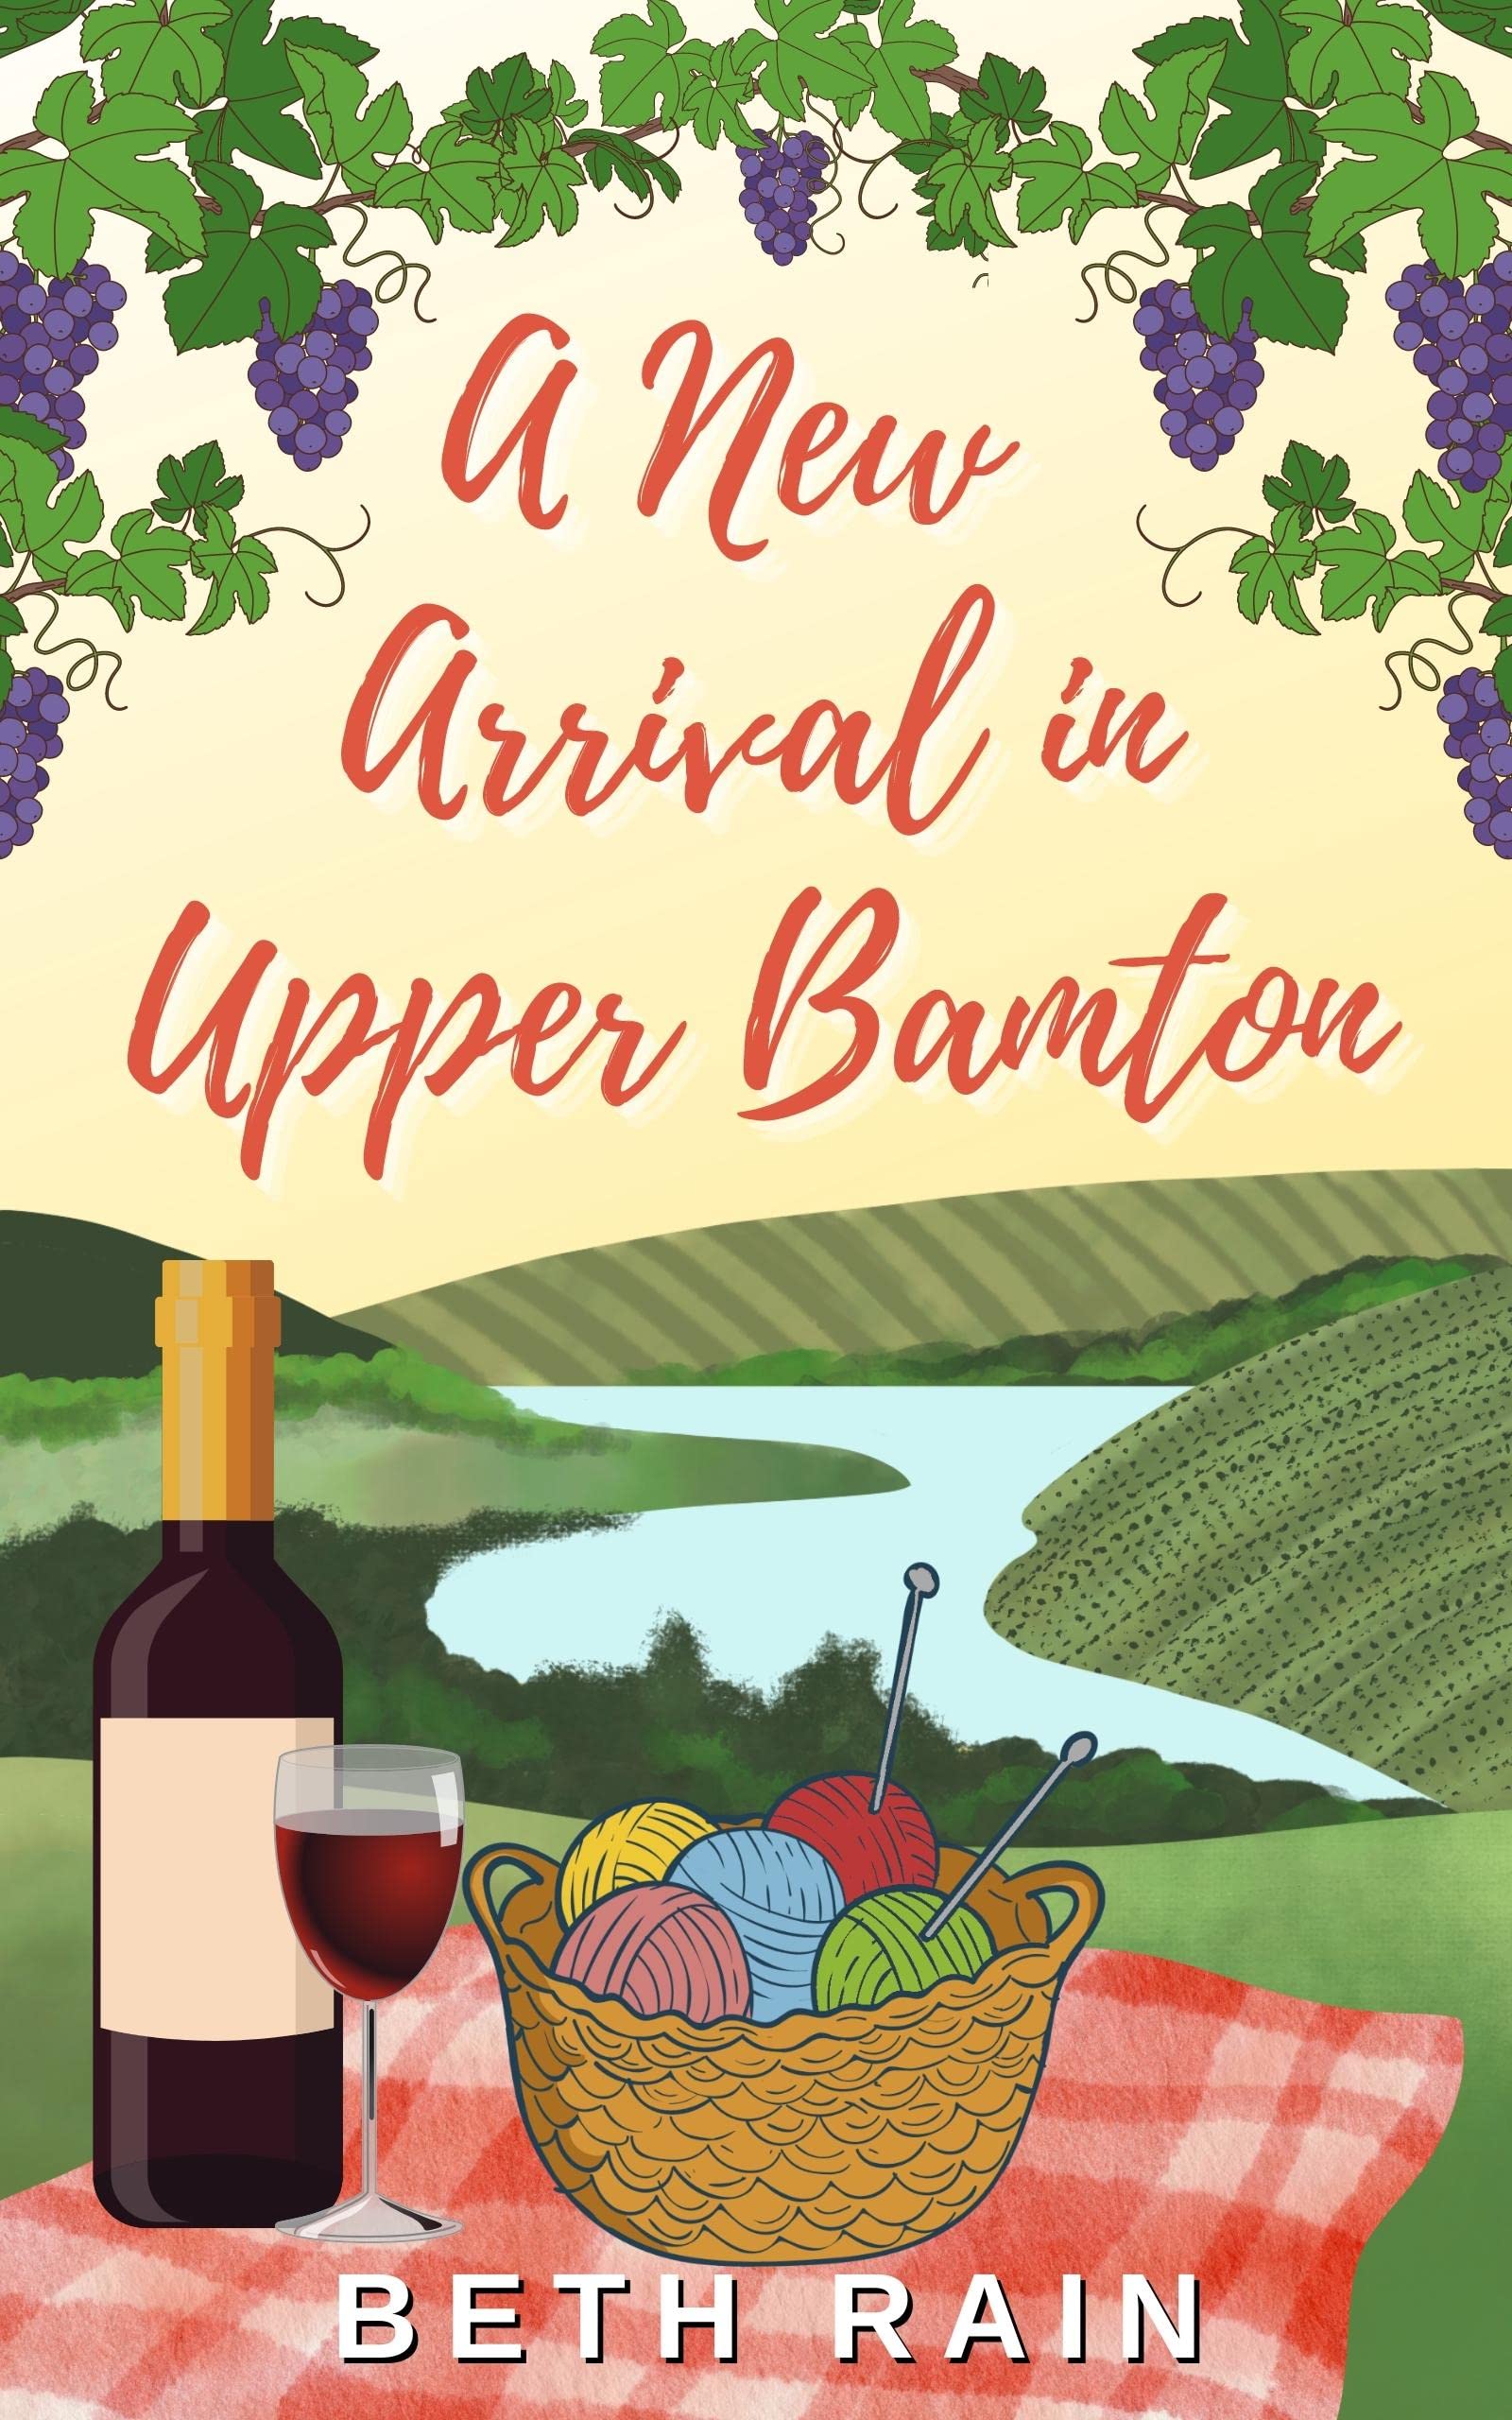 A New Arrival In Upper Bamton